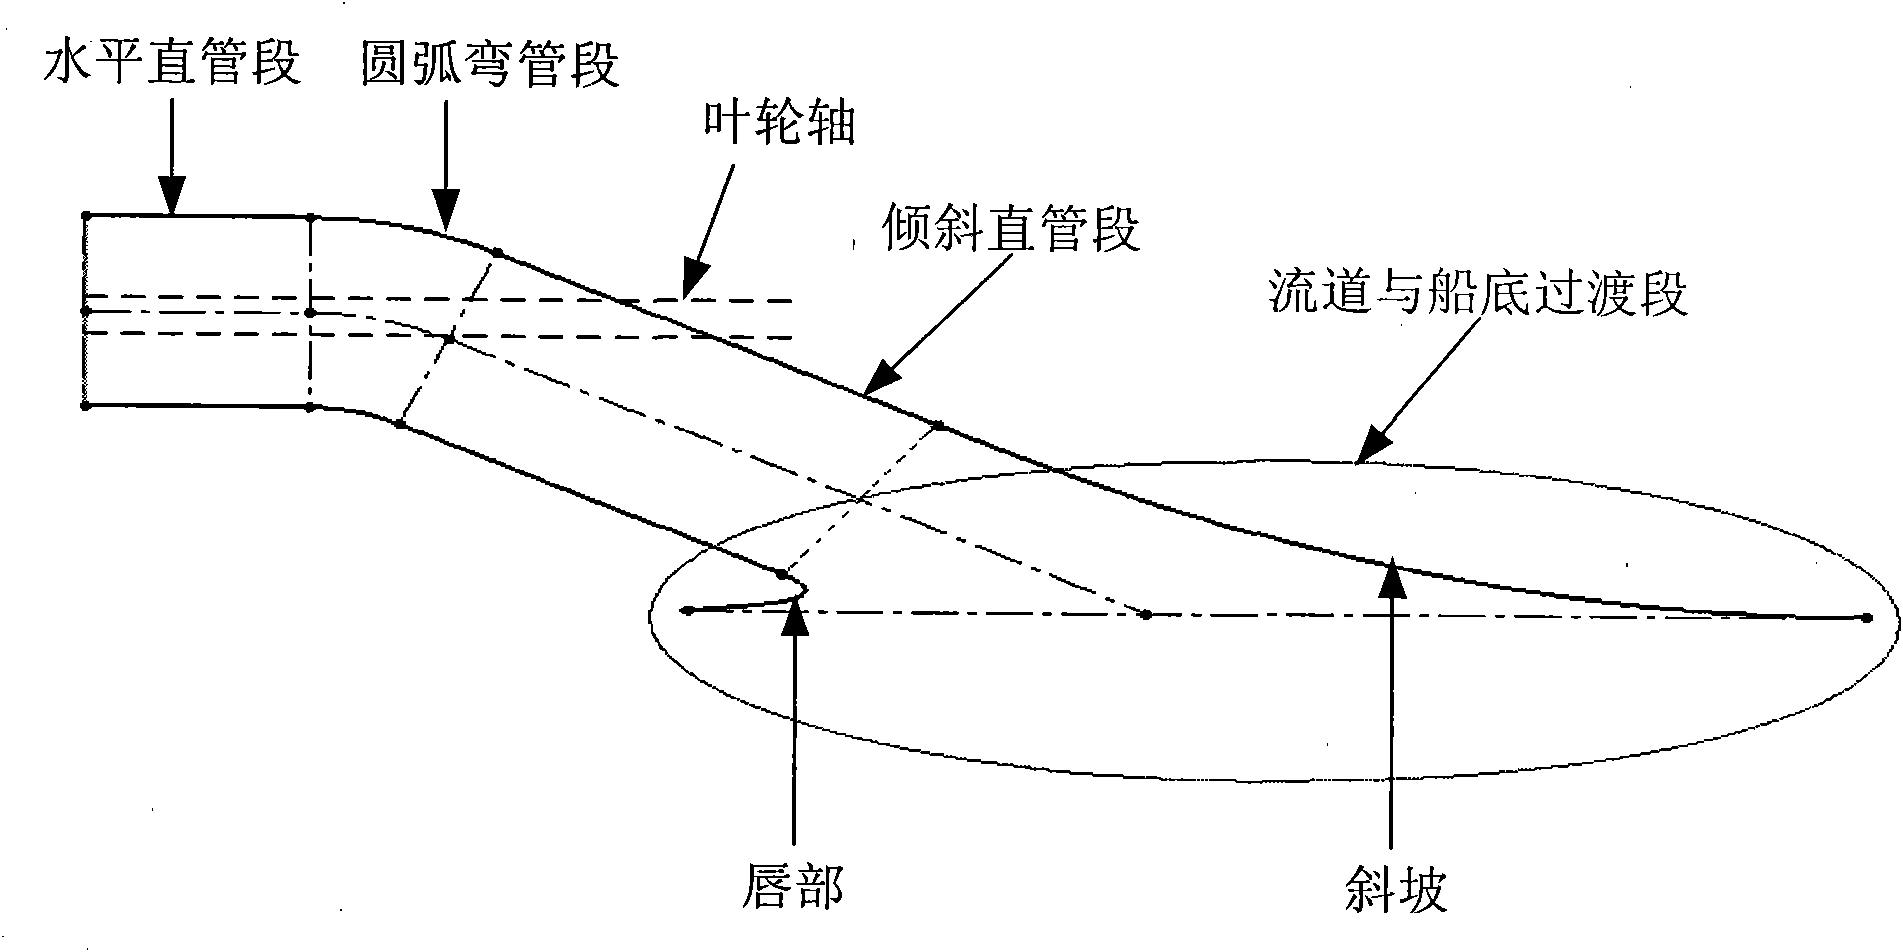 Parameterized design method for water inlet flow channel of water jet propeller of ship